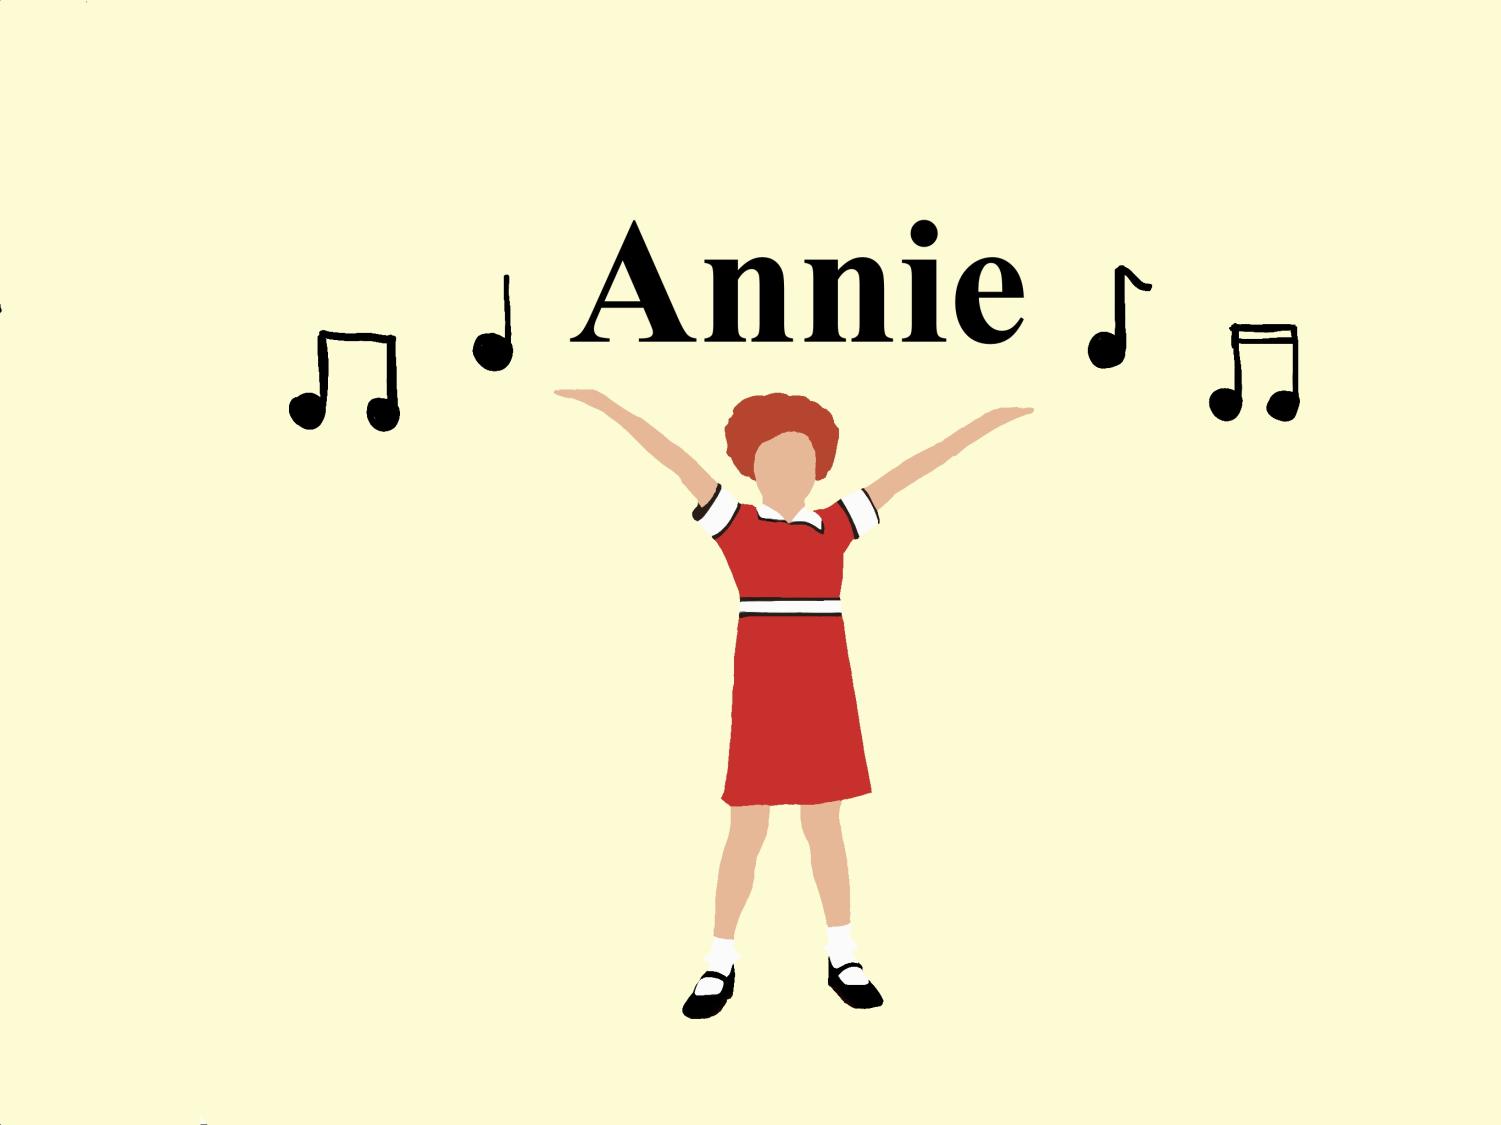 With her cheer and scrappiness, Annie, an orphan living in New York city, has inspired audiences for over 100 years. 